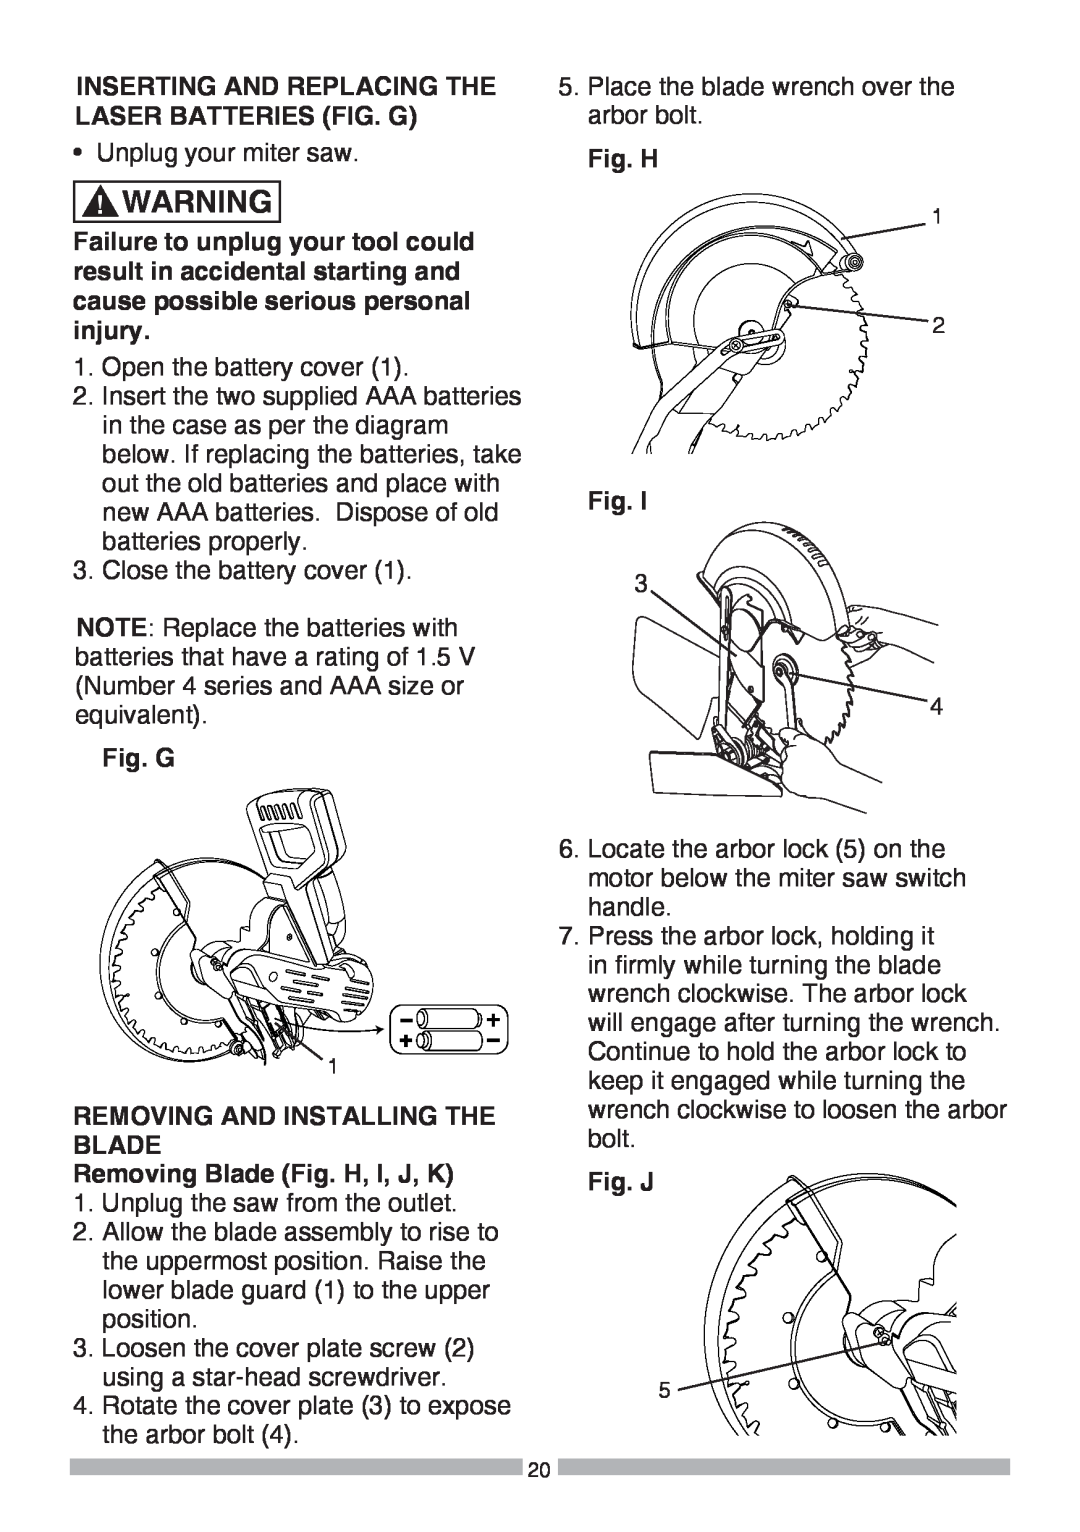 Craftsman 137.37564 manual Inserting And Replacing The Laser Batteries Fig. G, Fig. H, Fig. J 